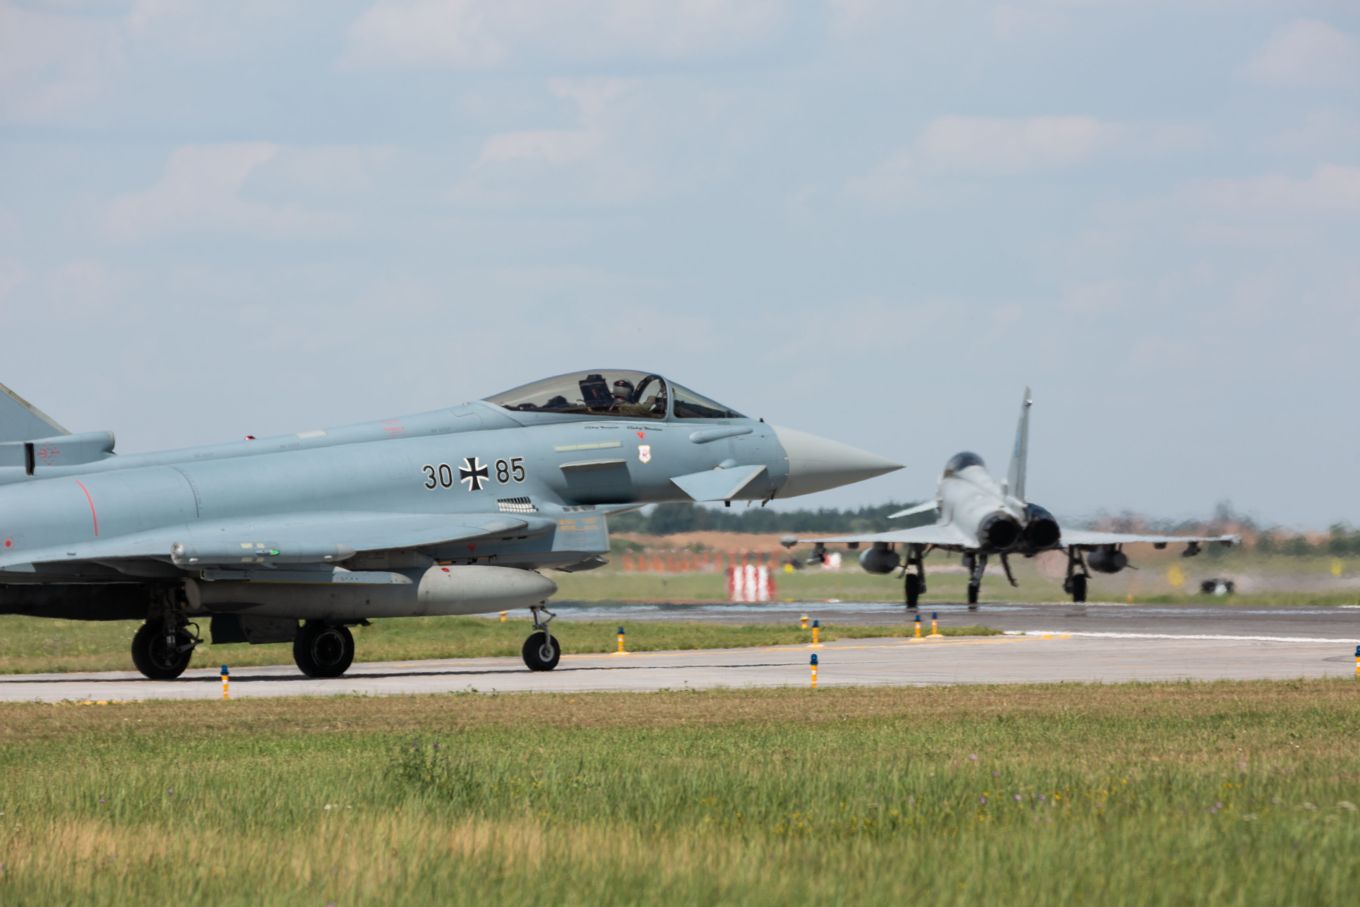 Image shows an RAF Typhoon and a German Eurofighter taxiing on the runway.